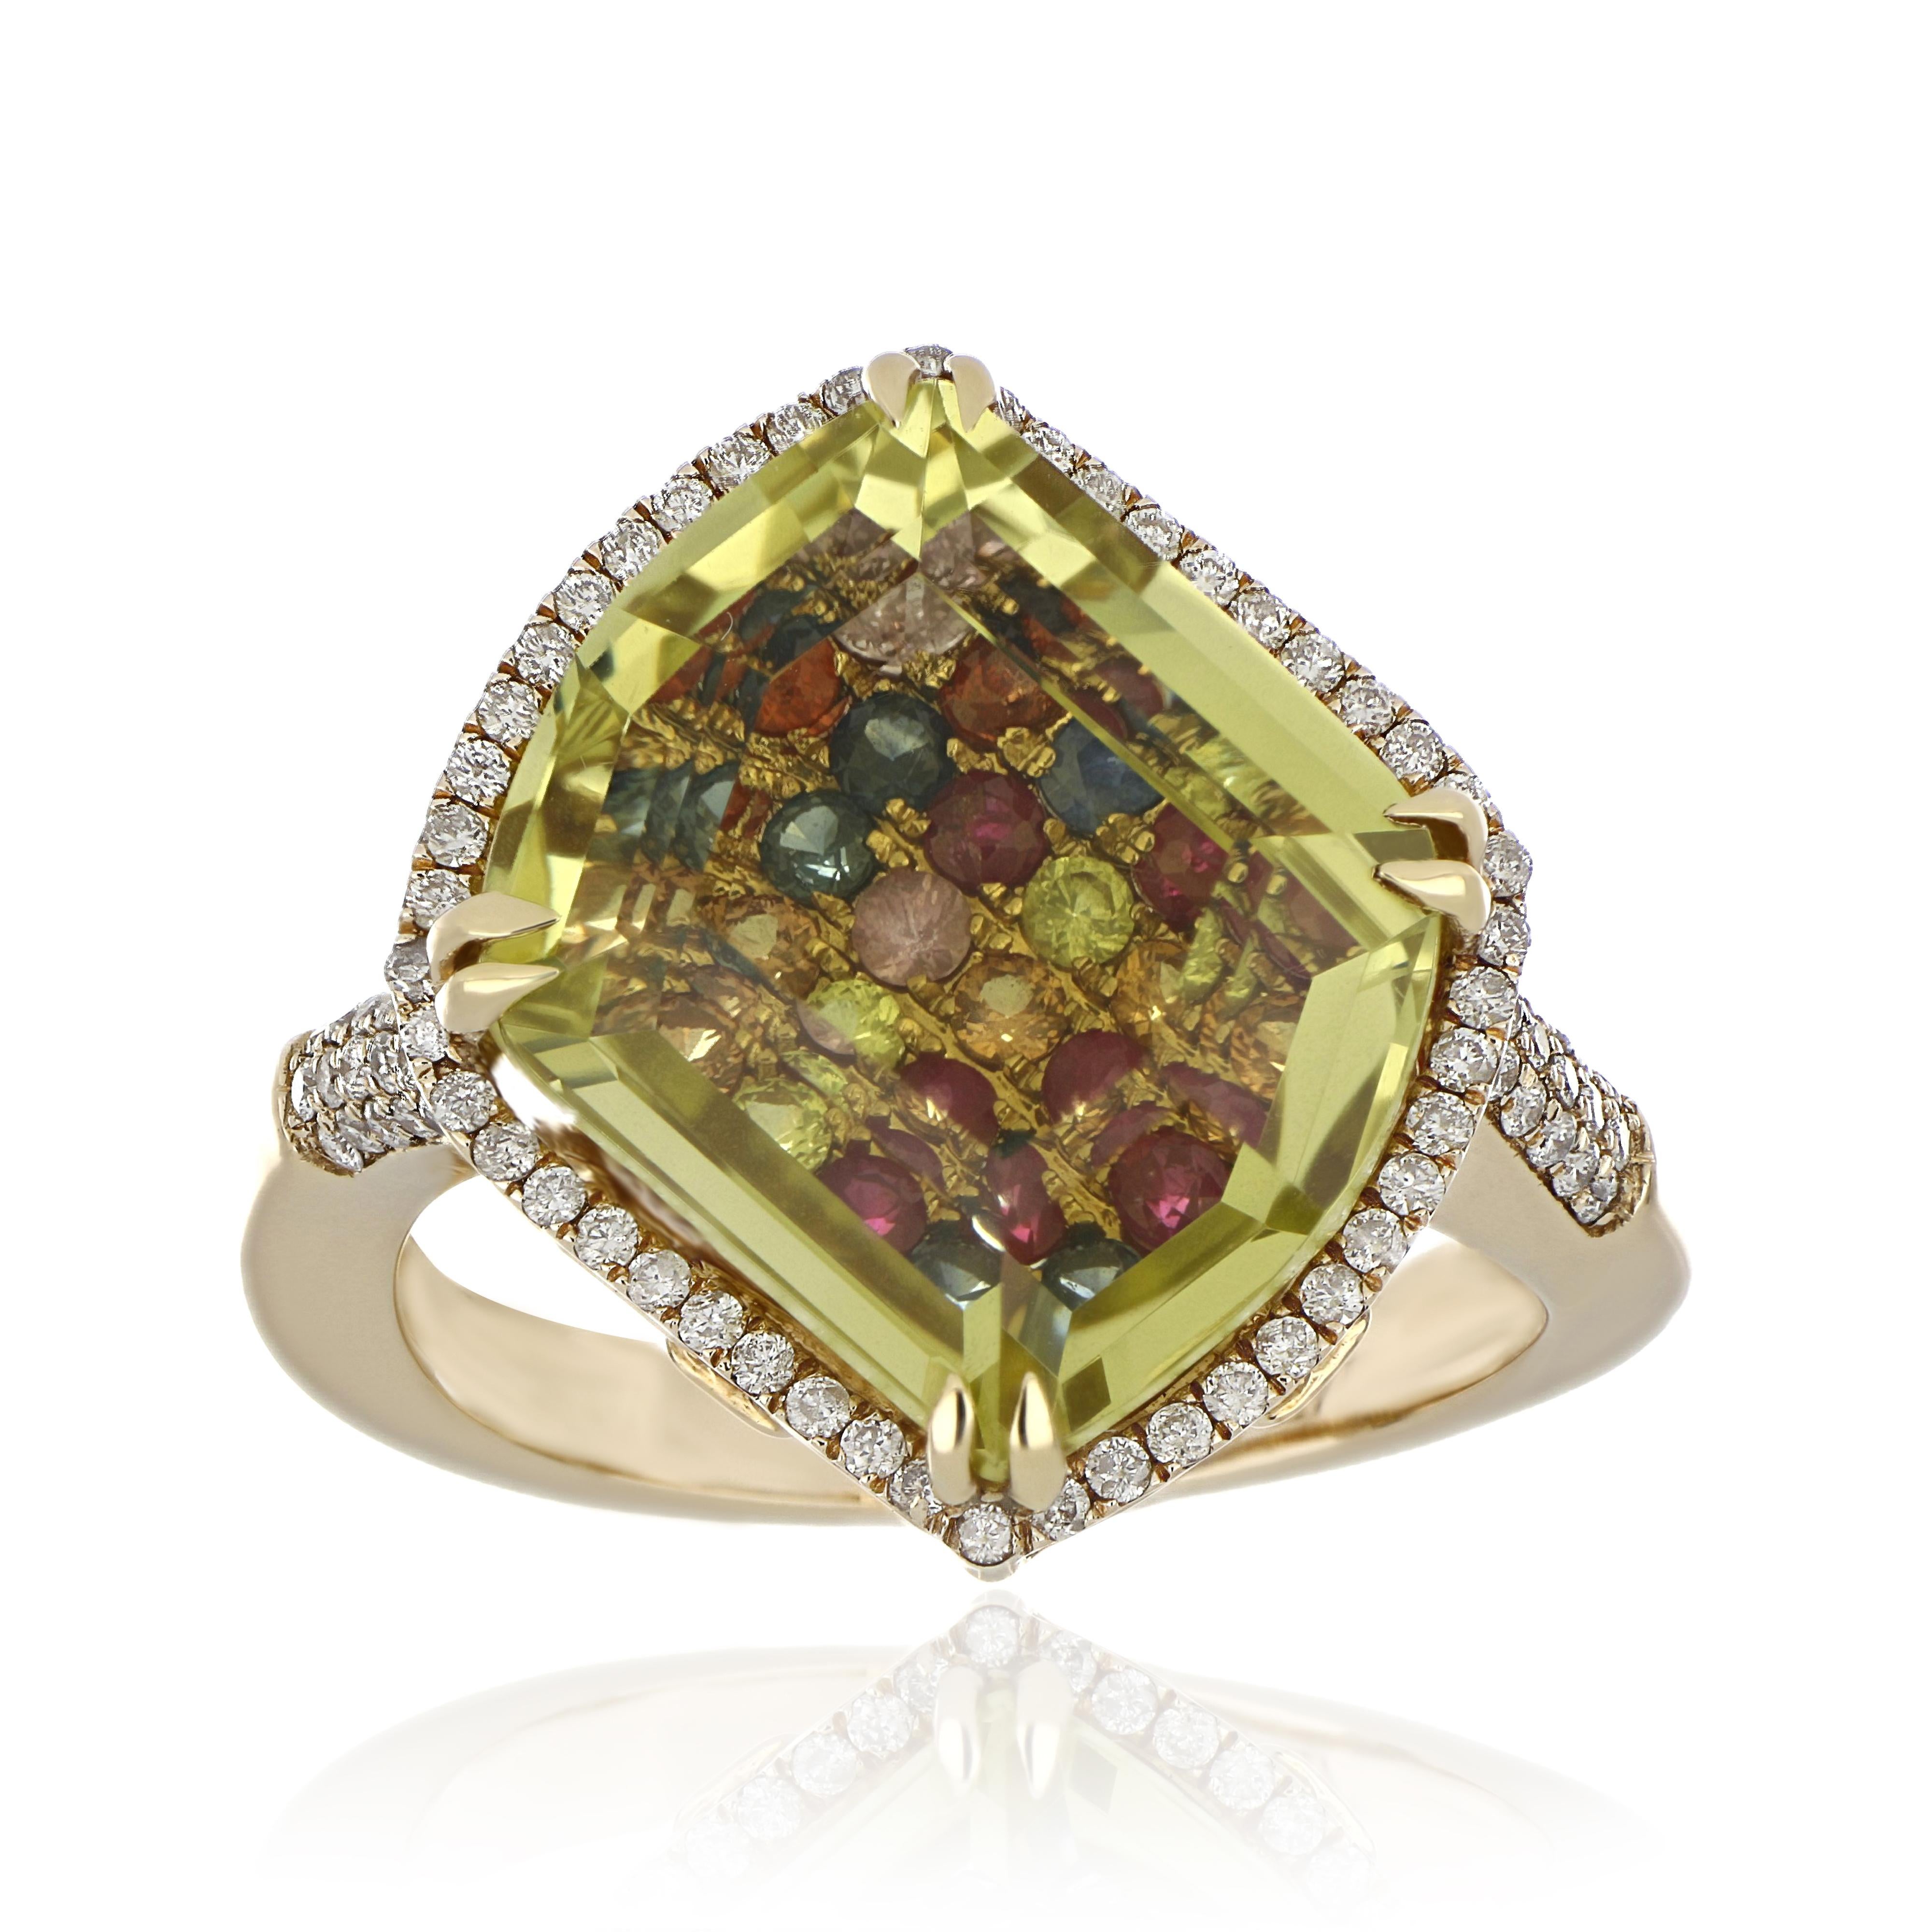 14 Karat Yellow Gold ring studded with fancy cut 10.28 Ct Lemon Quartz,  with unique under stone setting of 0.91 Cts Multi Sapphire and 0.312 Ct Diamond. Beautifully hand crafted in 14 Karat Yellow Gold.

Stone Details:
Lemon Quartz: 17.2x14.45